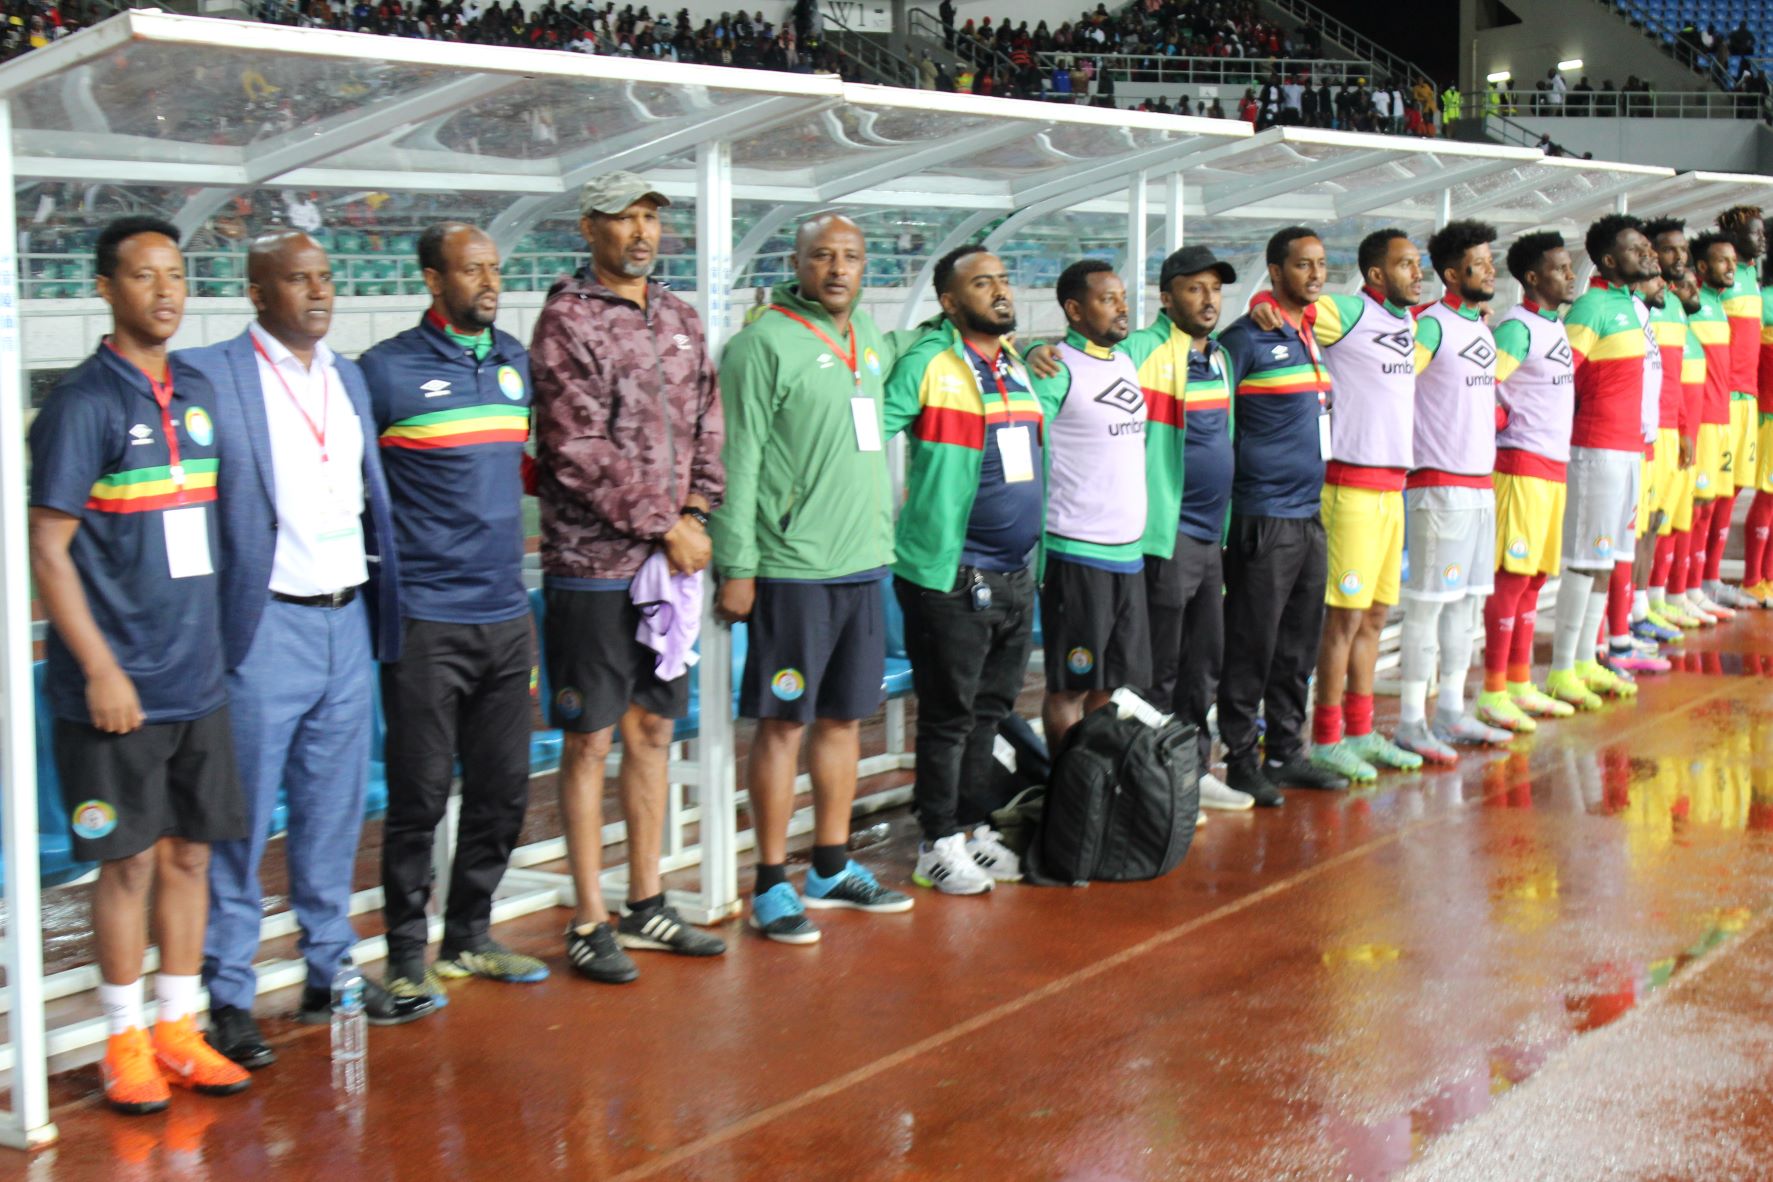 Ethiopian Coach, Wubetu (second from left) steered his team to victory pic by Tione Andsen (Mana)